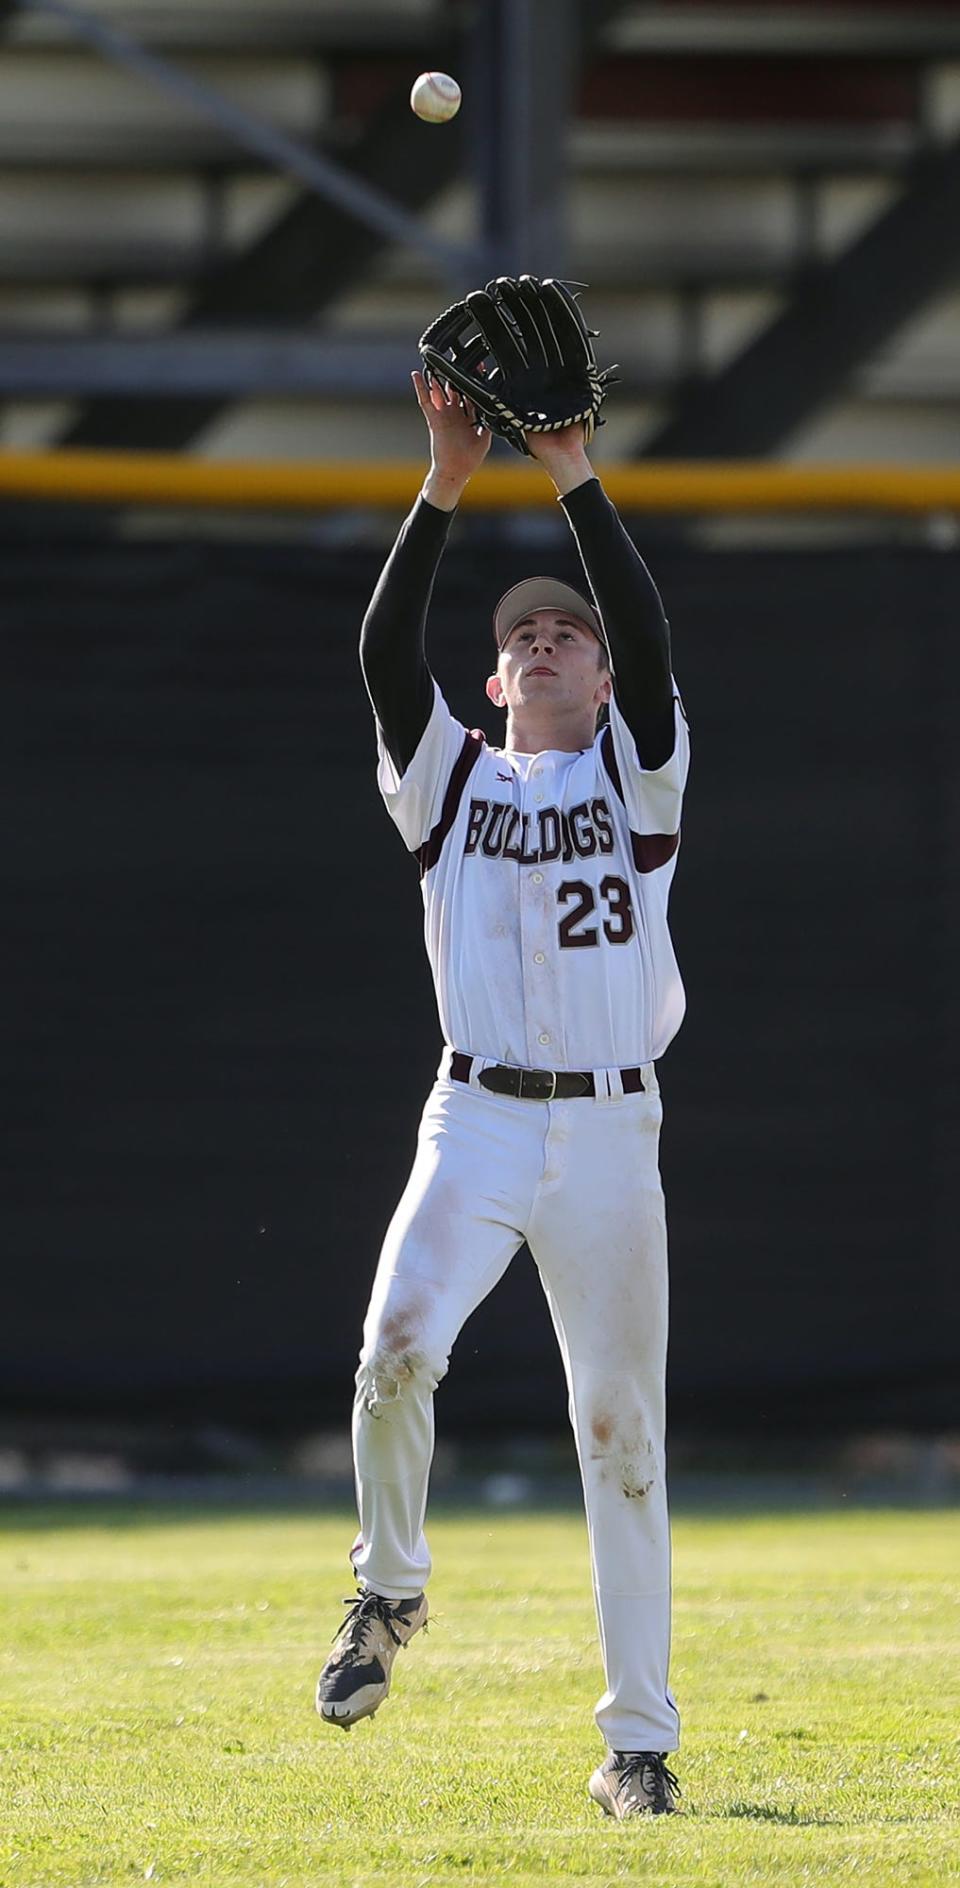 Woodridge centerfielder Steven Duffy gets under a fly ball hit by Coventry batter Johnny Clemente during the second inning of a baseball game on Monday.